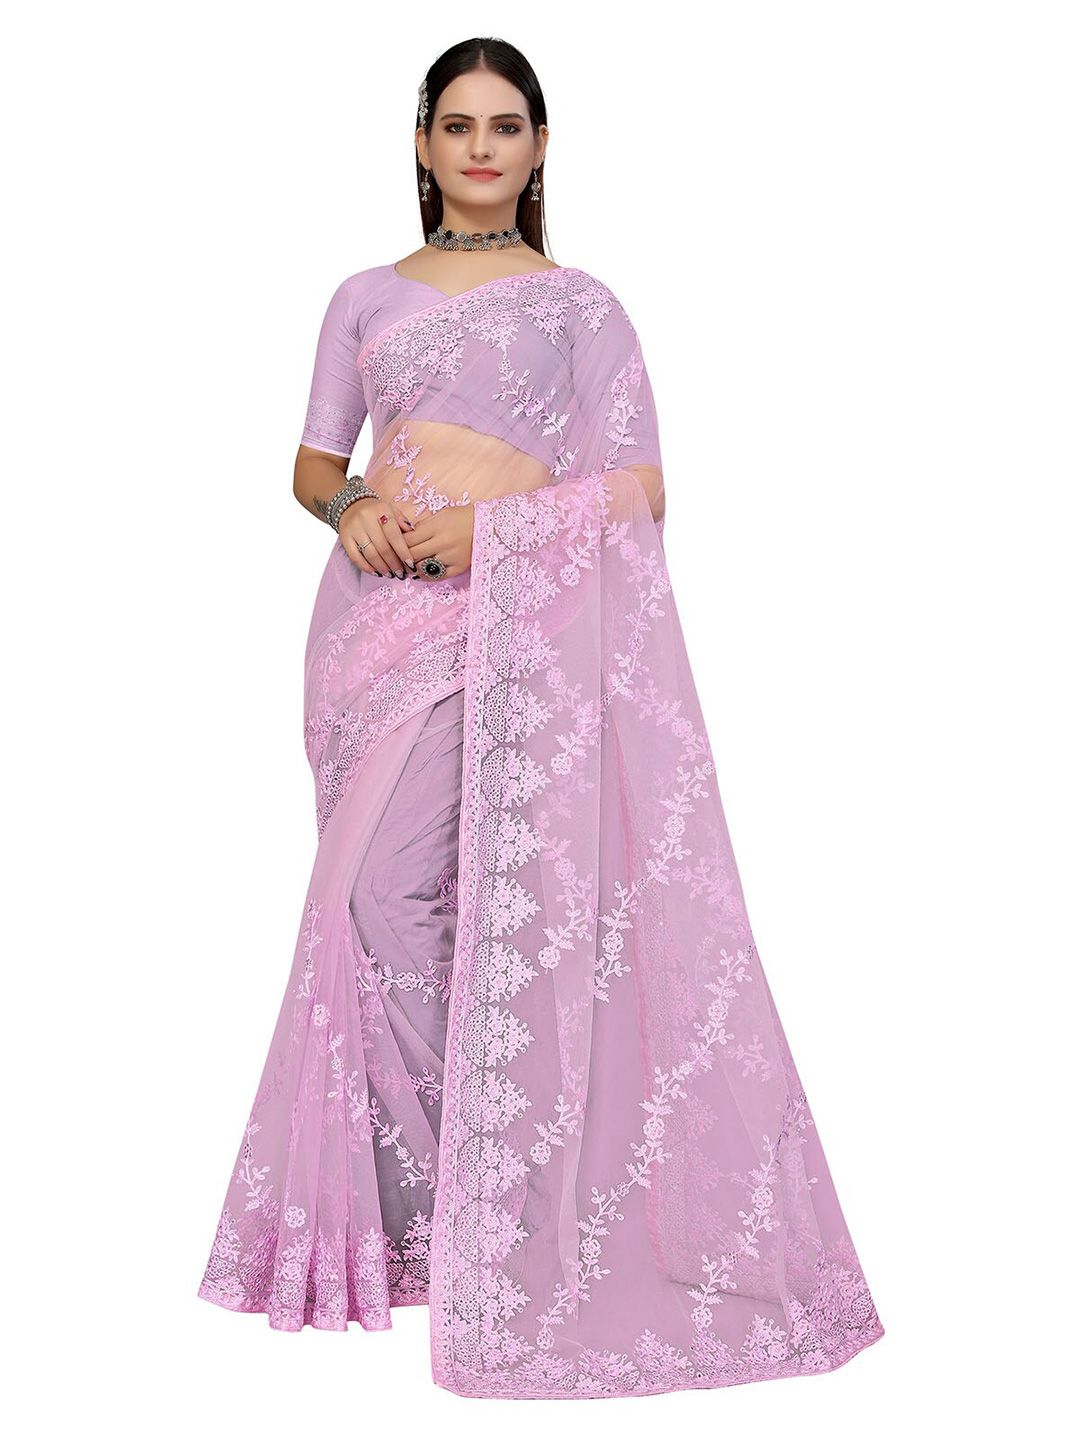 ODETTE Purple Floral Embroidered Net Saree Price in India